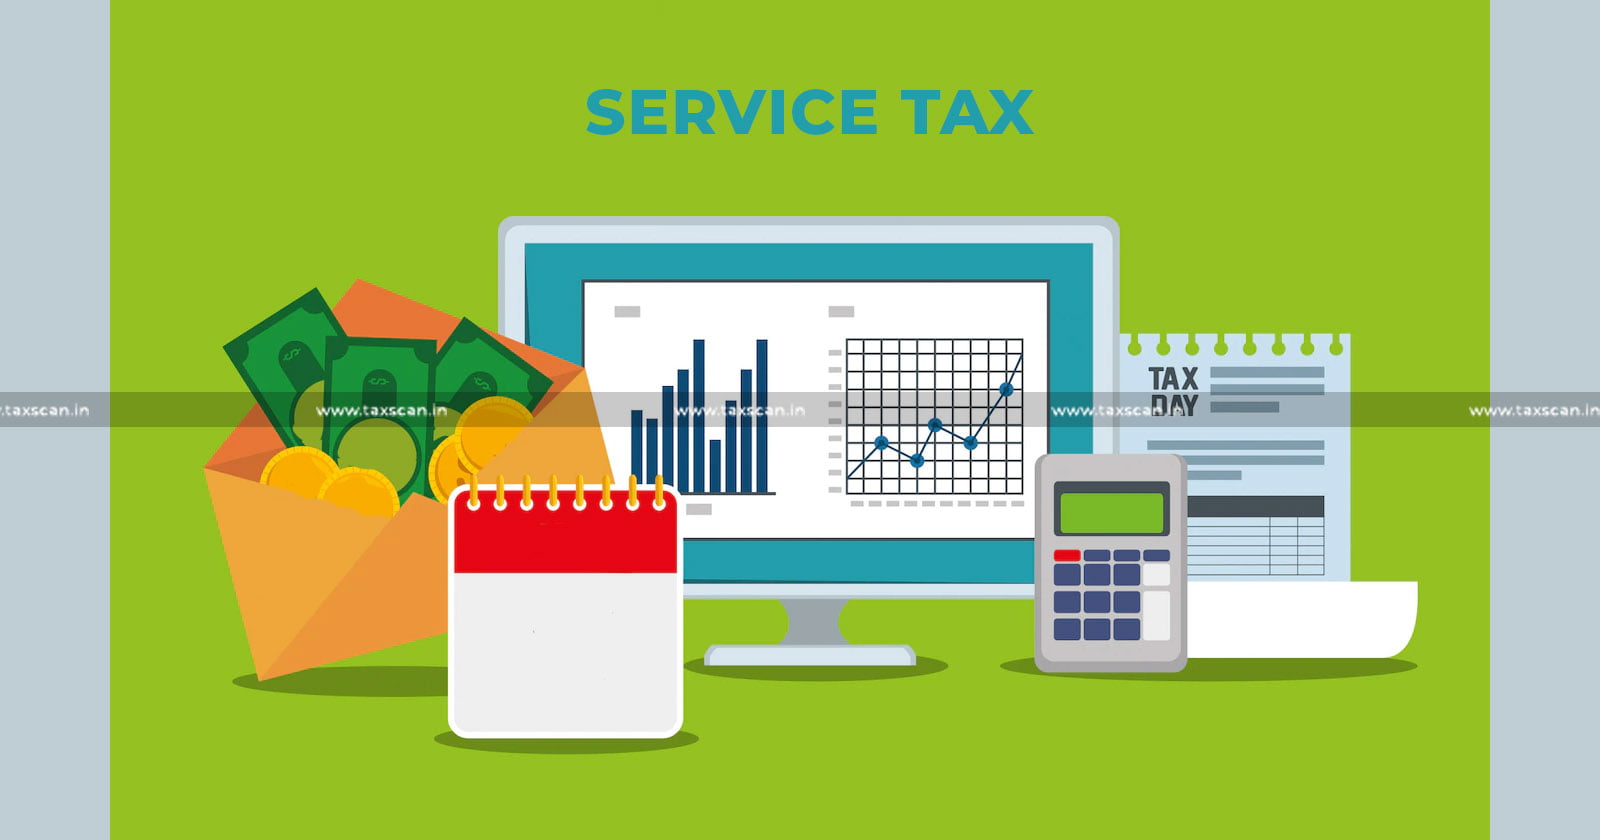 Commission Agent Services - Commission Agent Services are not Branded Service - Service tax - taxscan